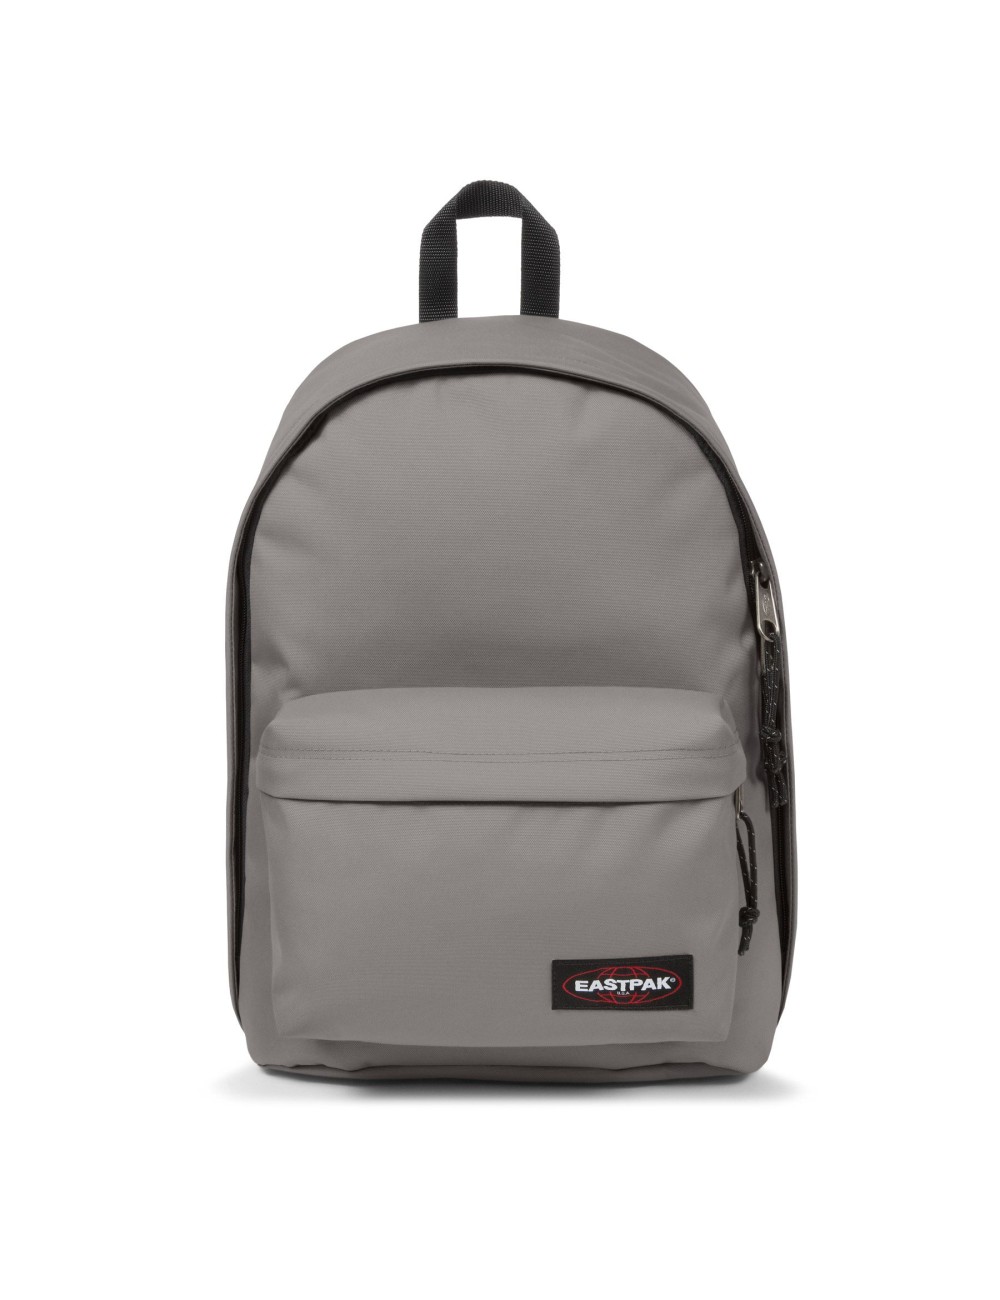 EASTPAK OUT OF OFFICE COLOR GRIS TALLA TALLA UNICA